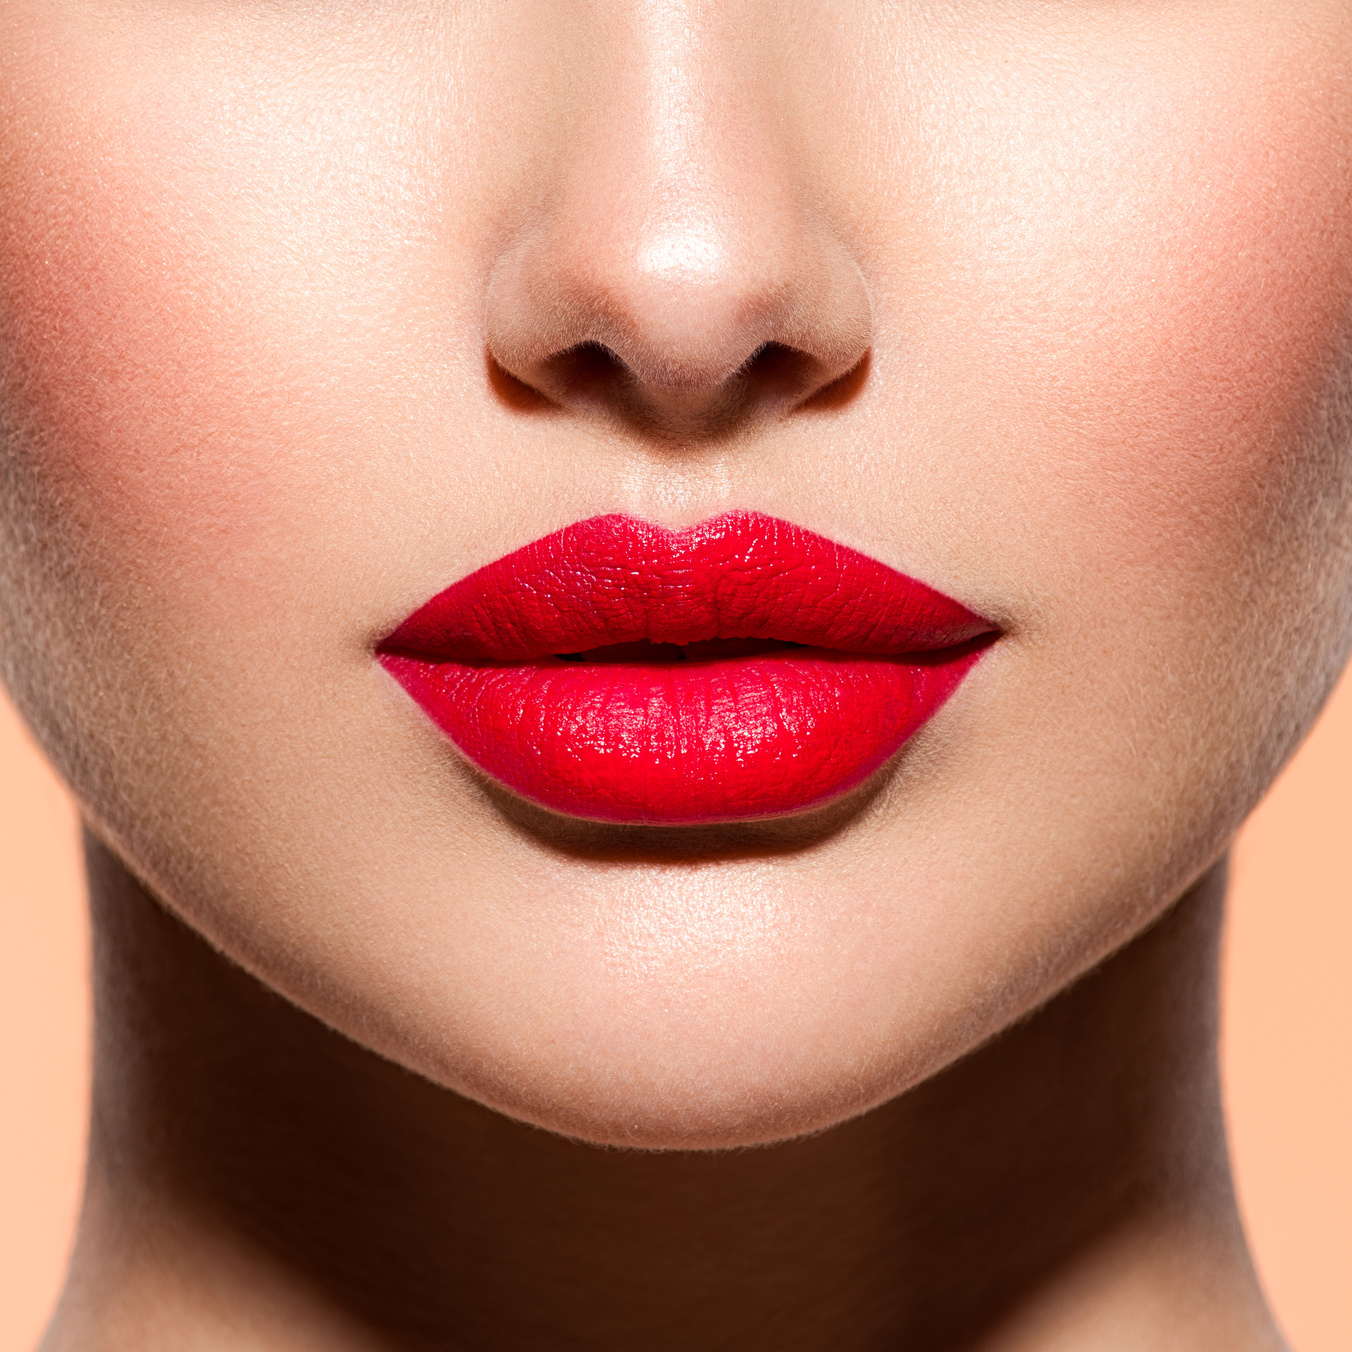 Woman Lips with a Red Lipstick on Lips. Closeup Female Red Lips.